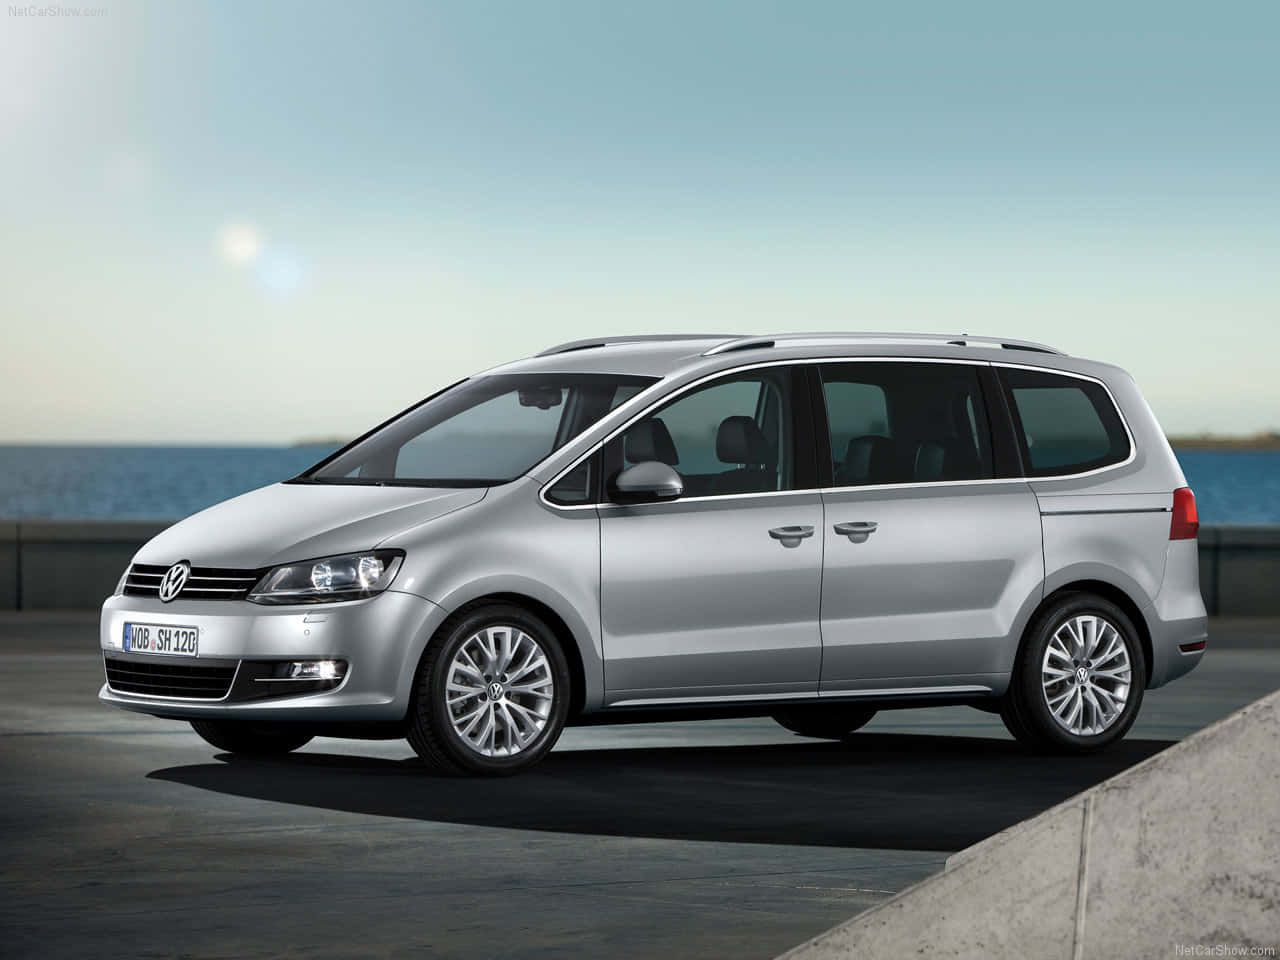 Caption: Luxury On The Move - The Classic Volkswagen Sharan Wallpaper